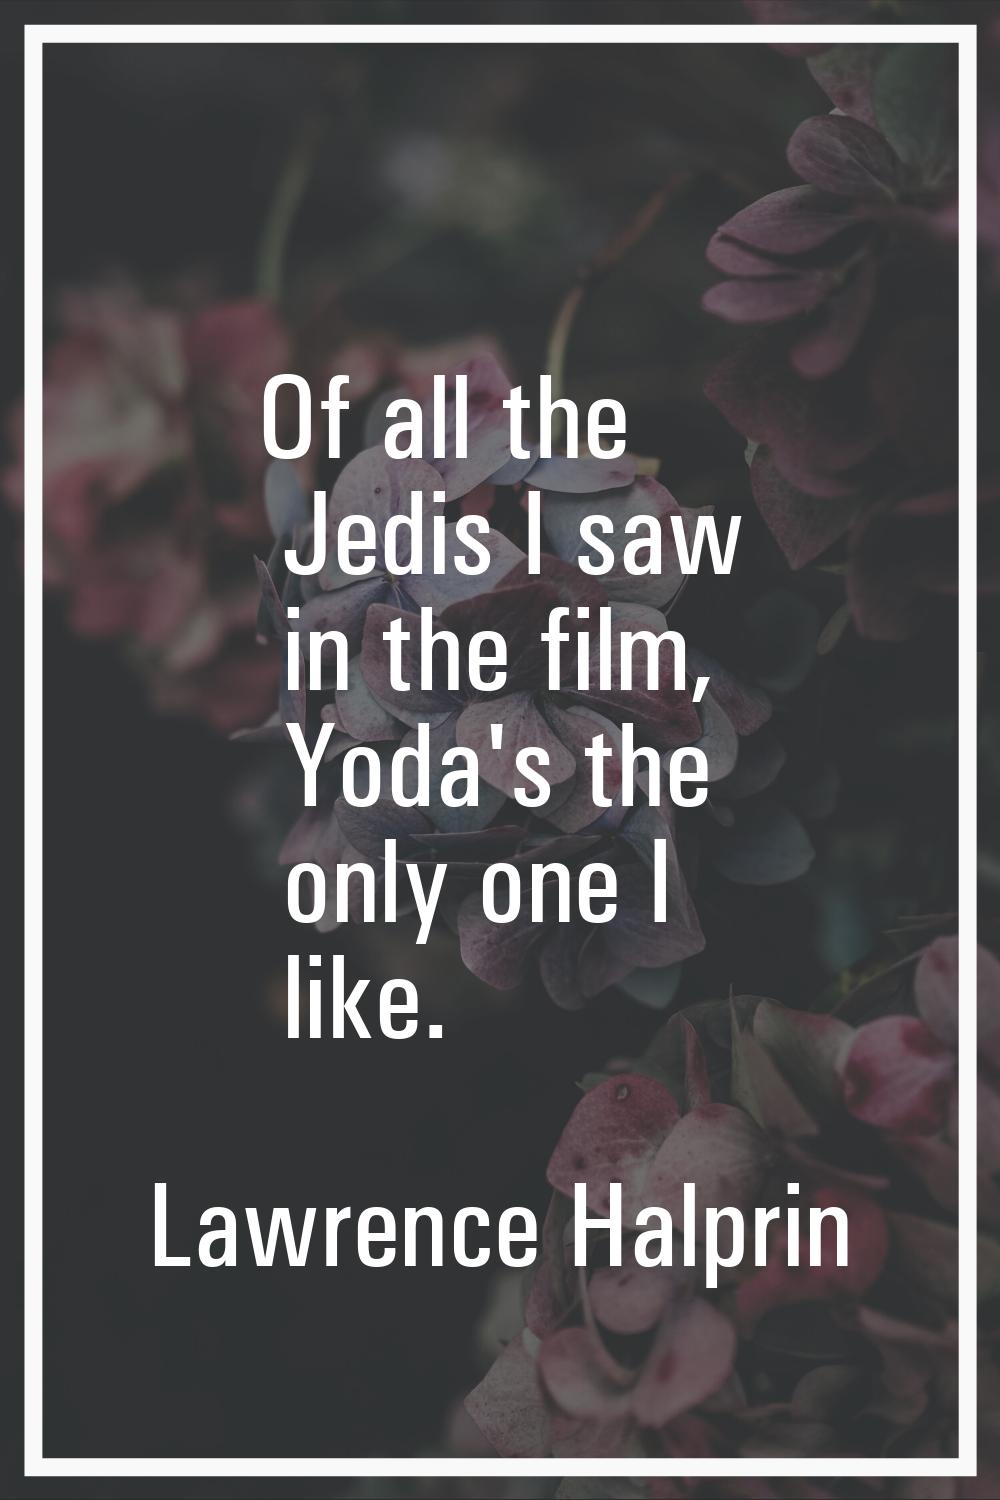 Of all the Jedis I saw in the film, Yoda's the only one I like.